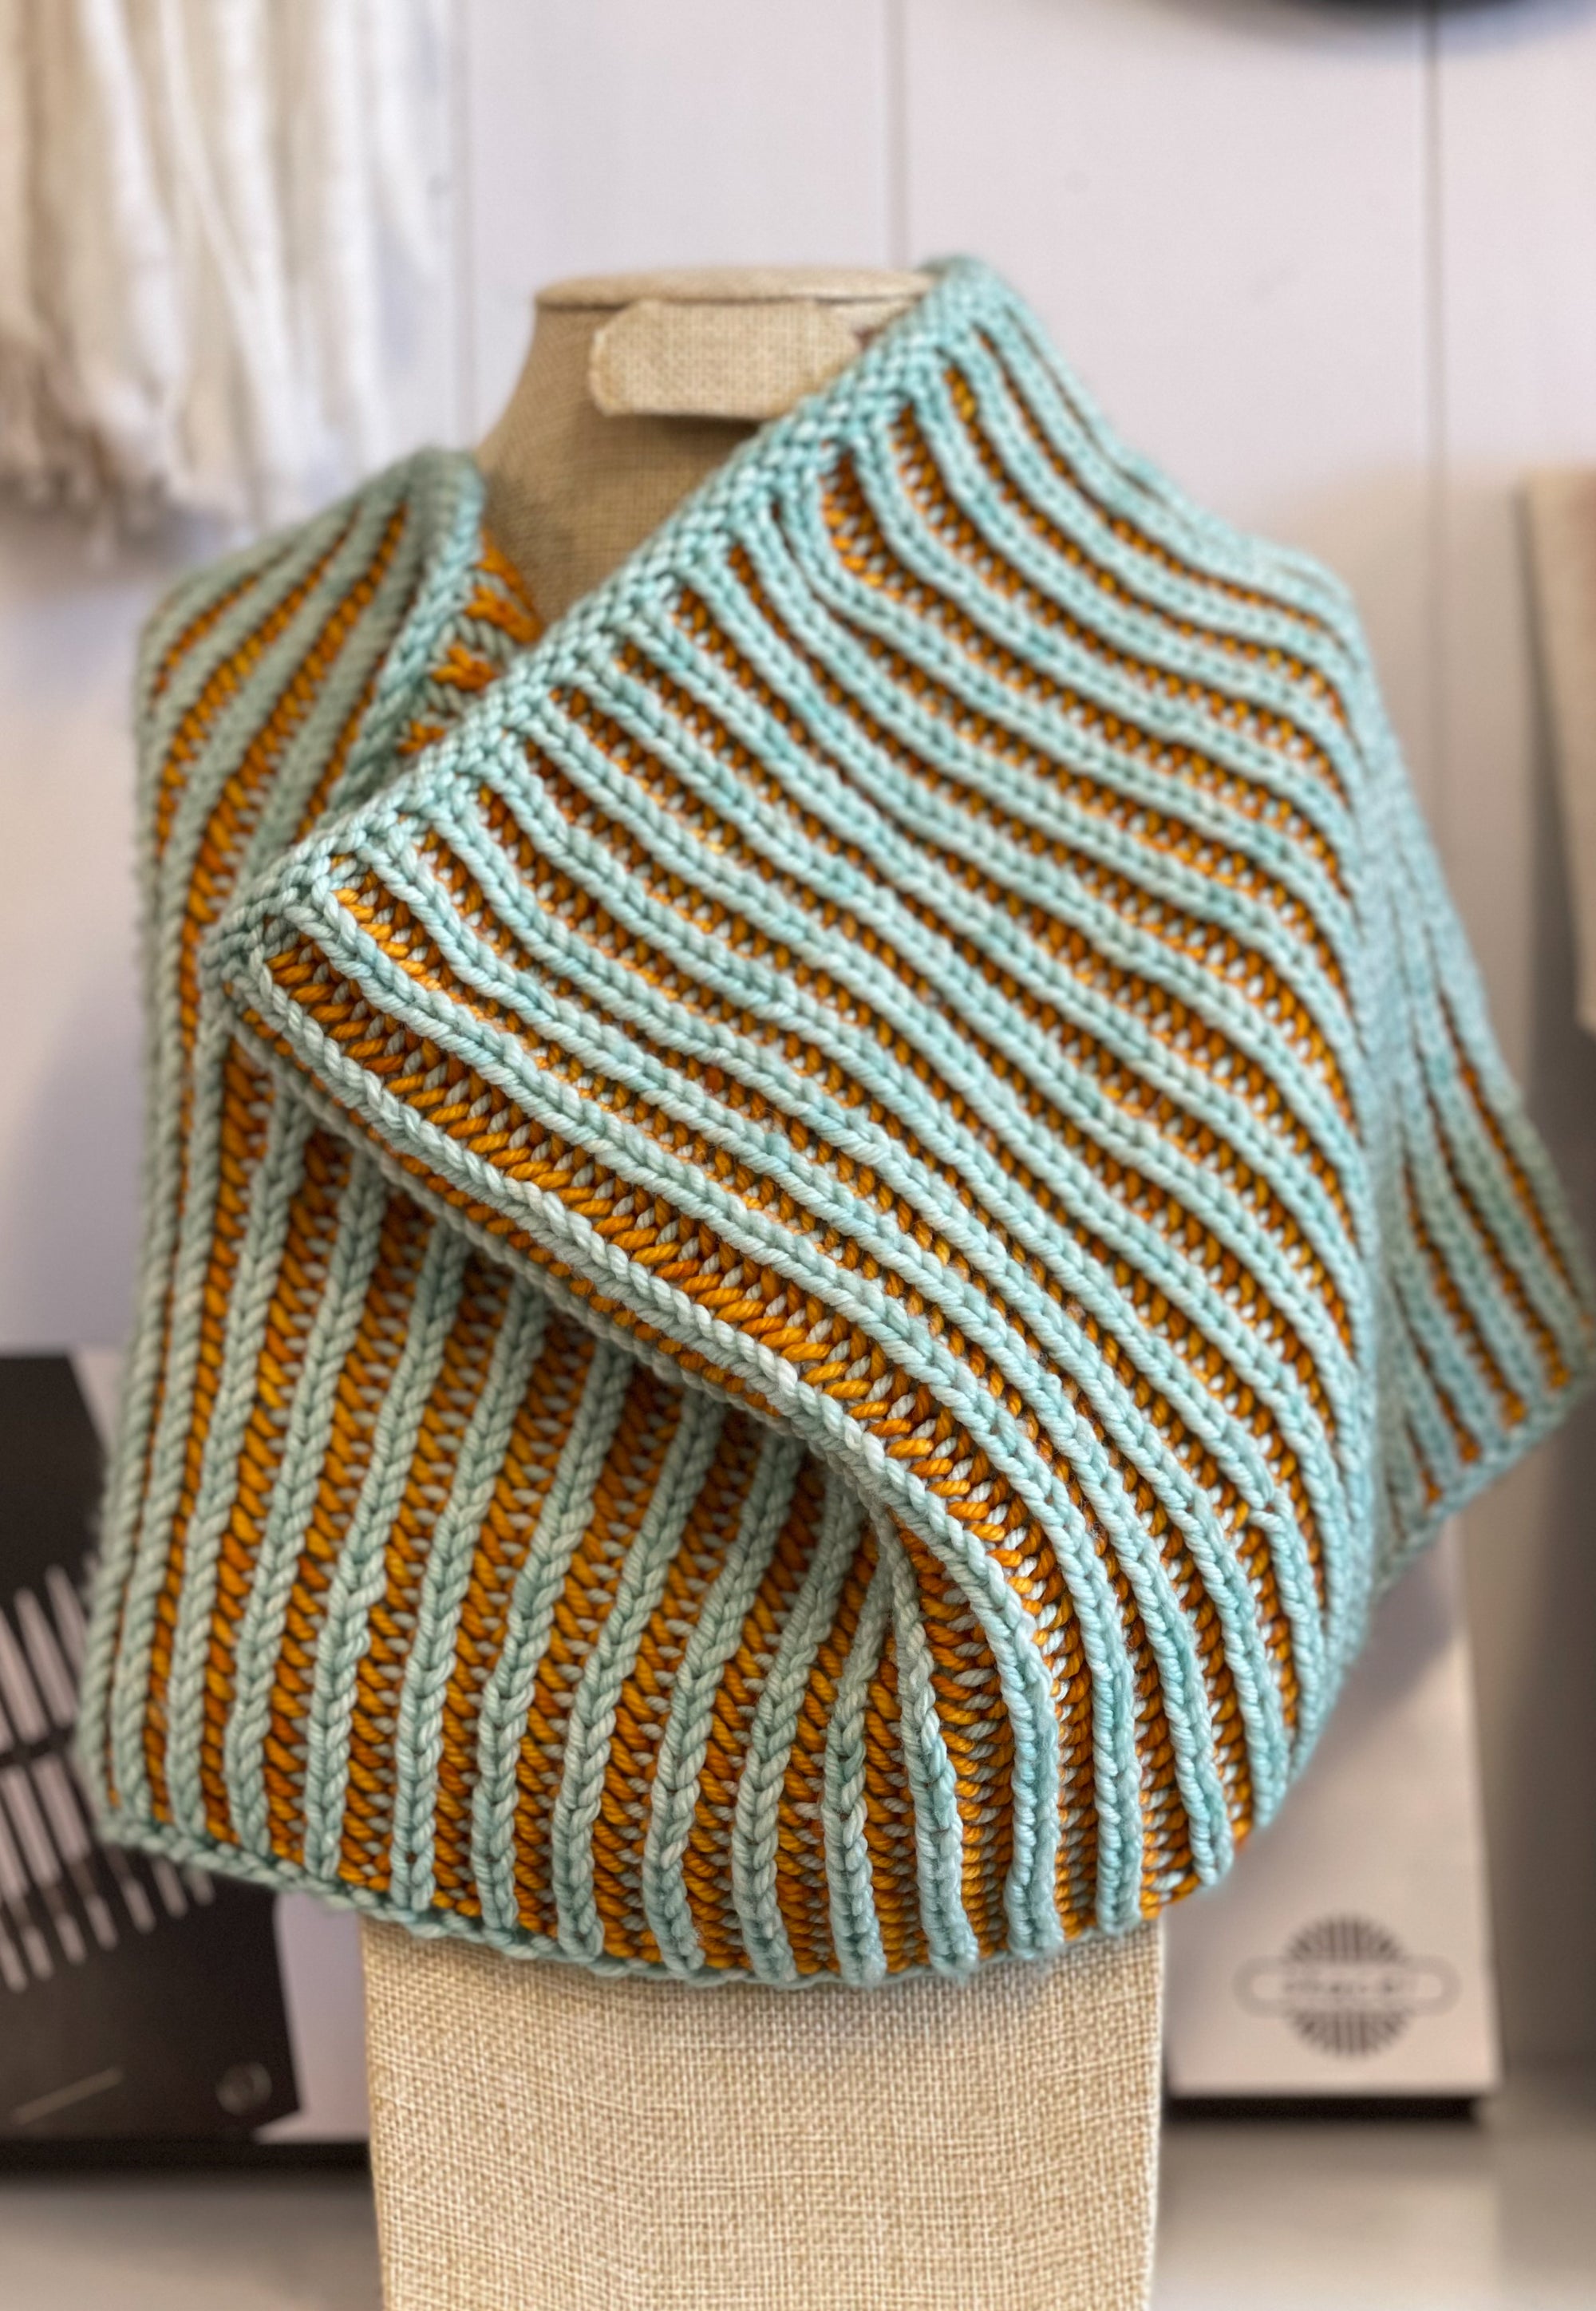 Knit 101 - Learn to Knit Tuesdays